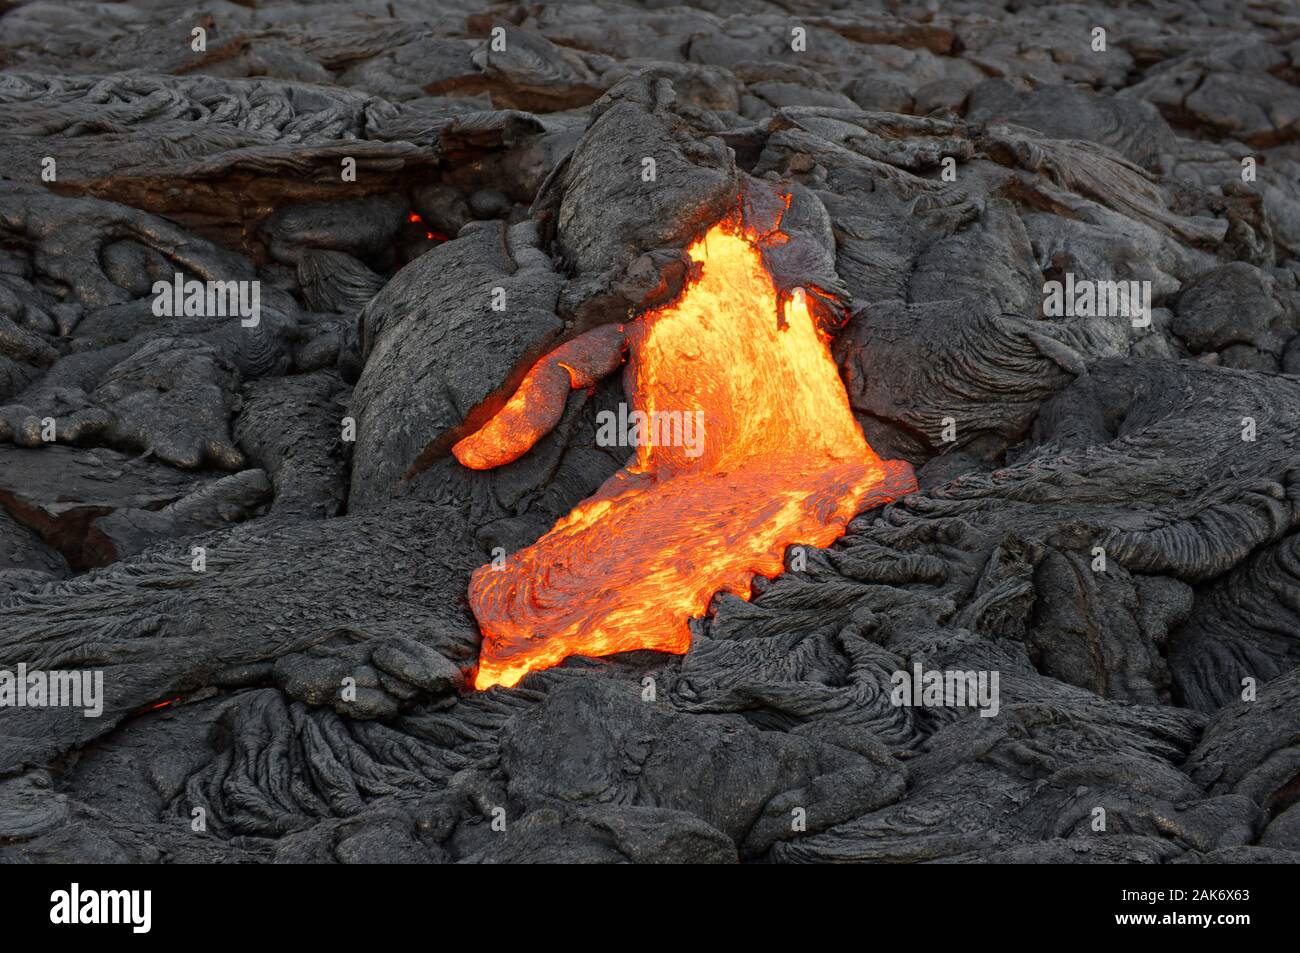 Hot magma of a lava flow from an active volcanic eruption emerges from a fissure and flows over previously deposited dark strongly structured rock, it Stock Photo